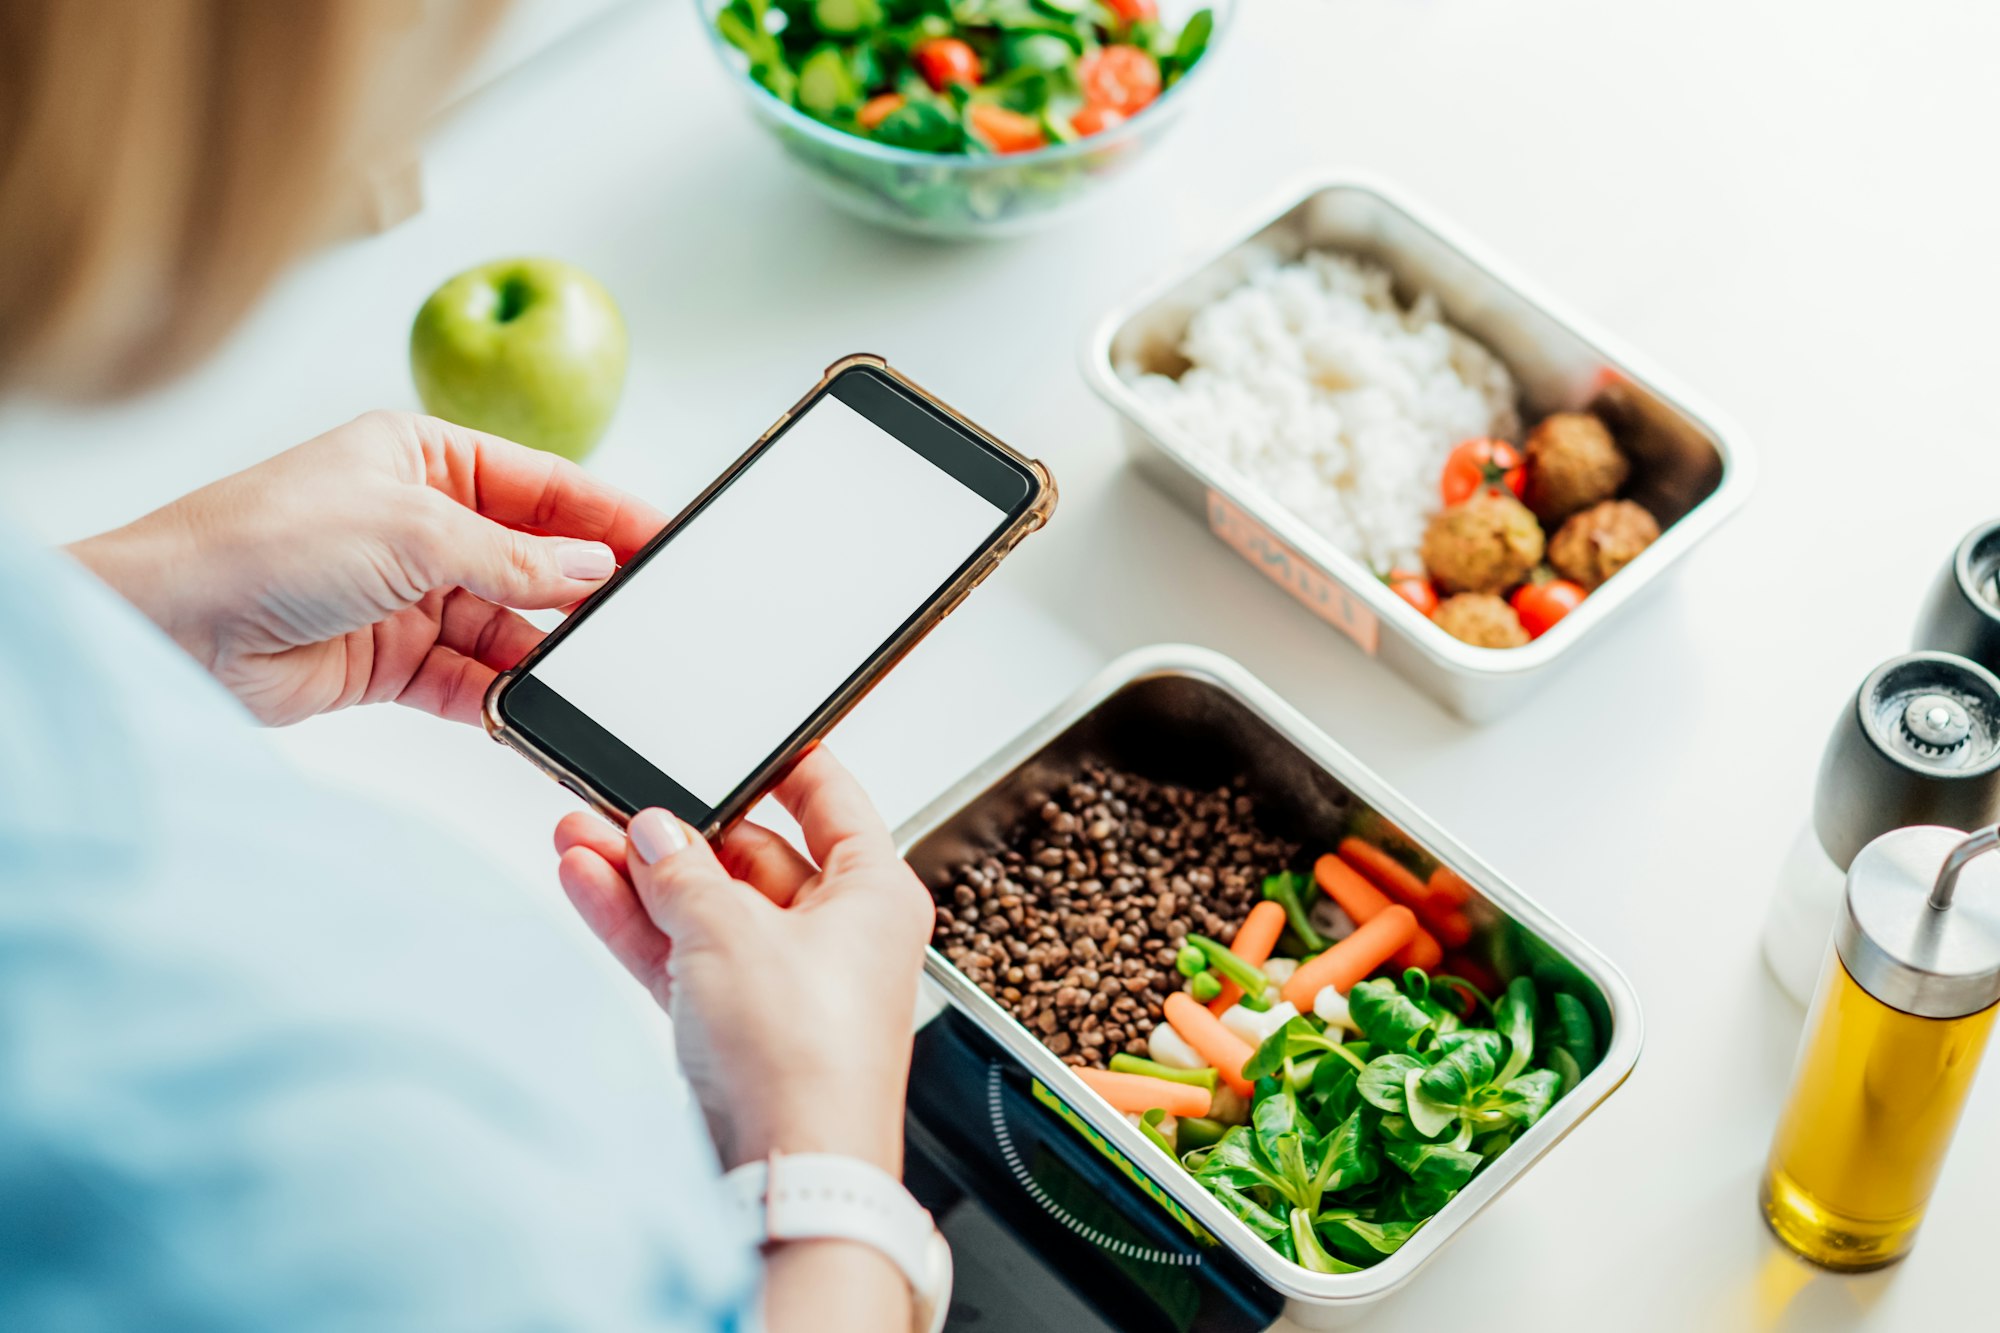 Healthy diet plan for weight loss, daily ready meal menu. Woman using phone with blank screen